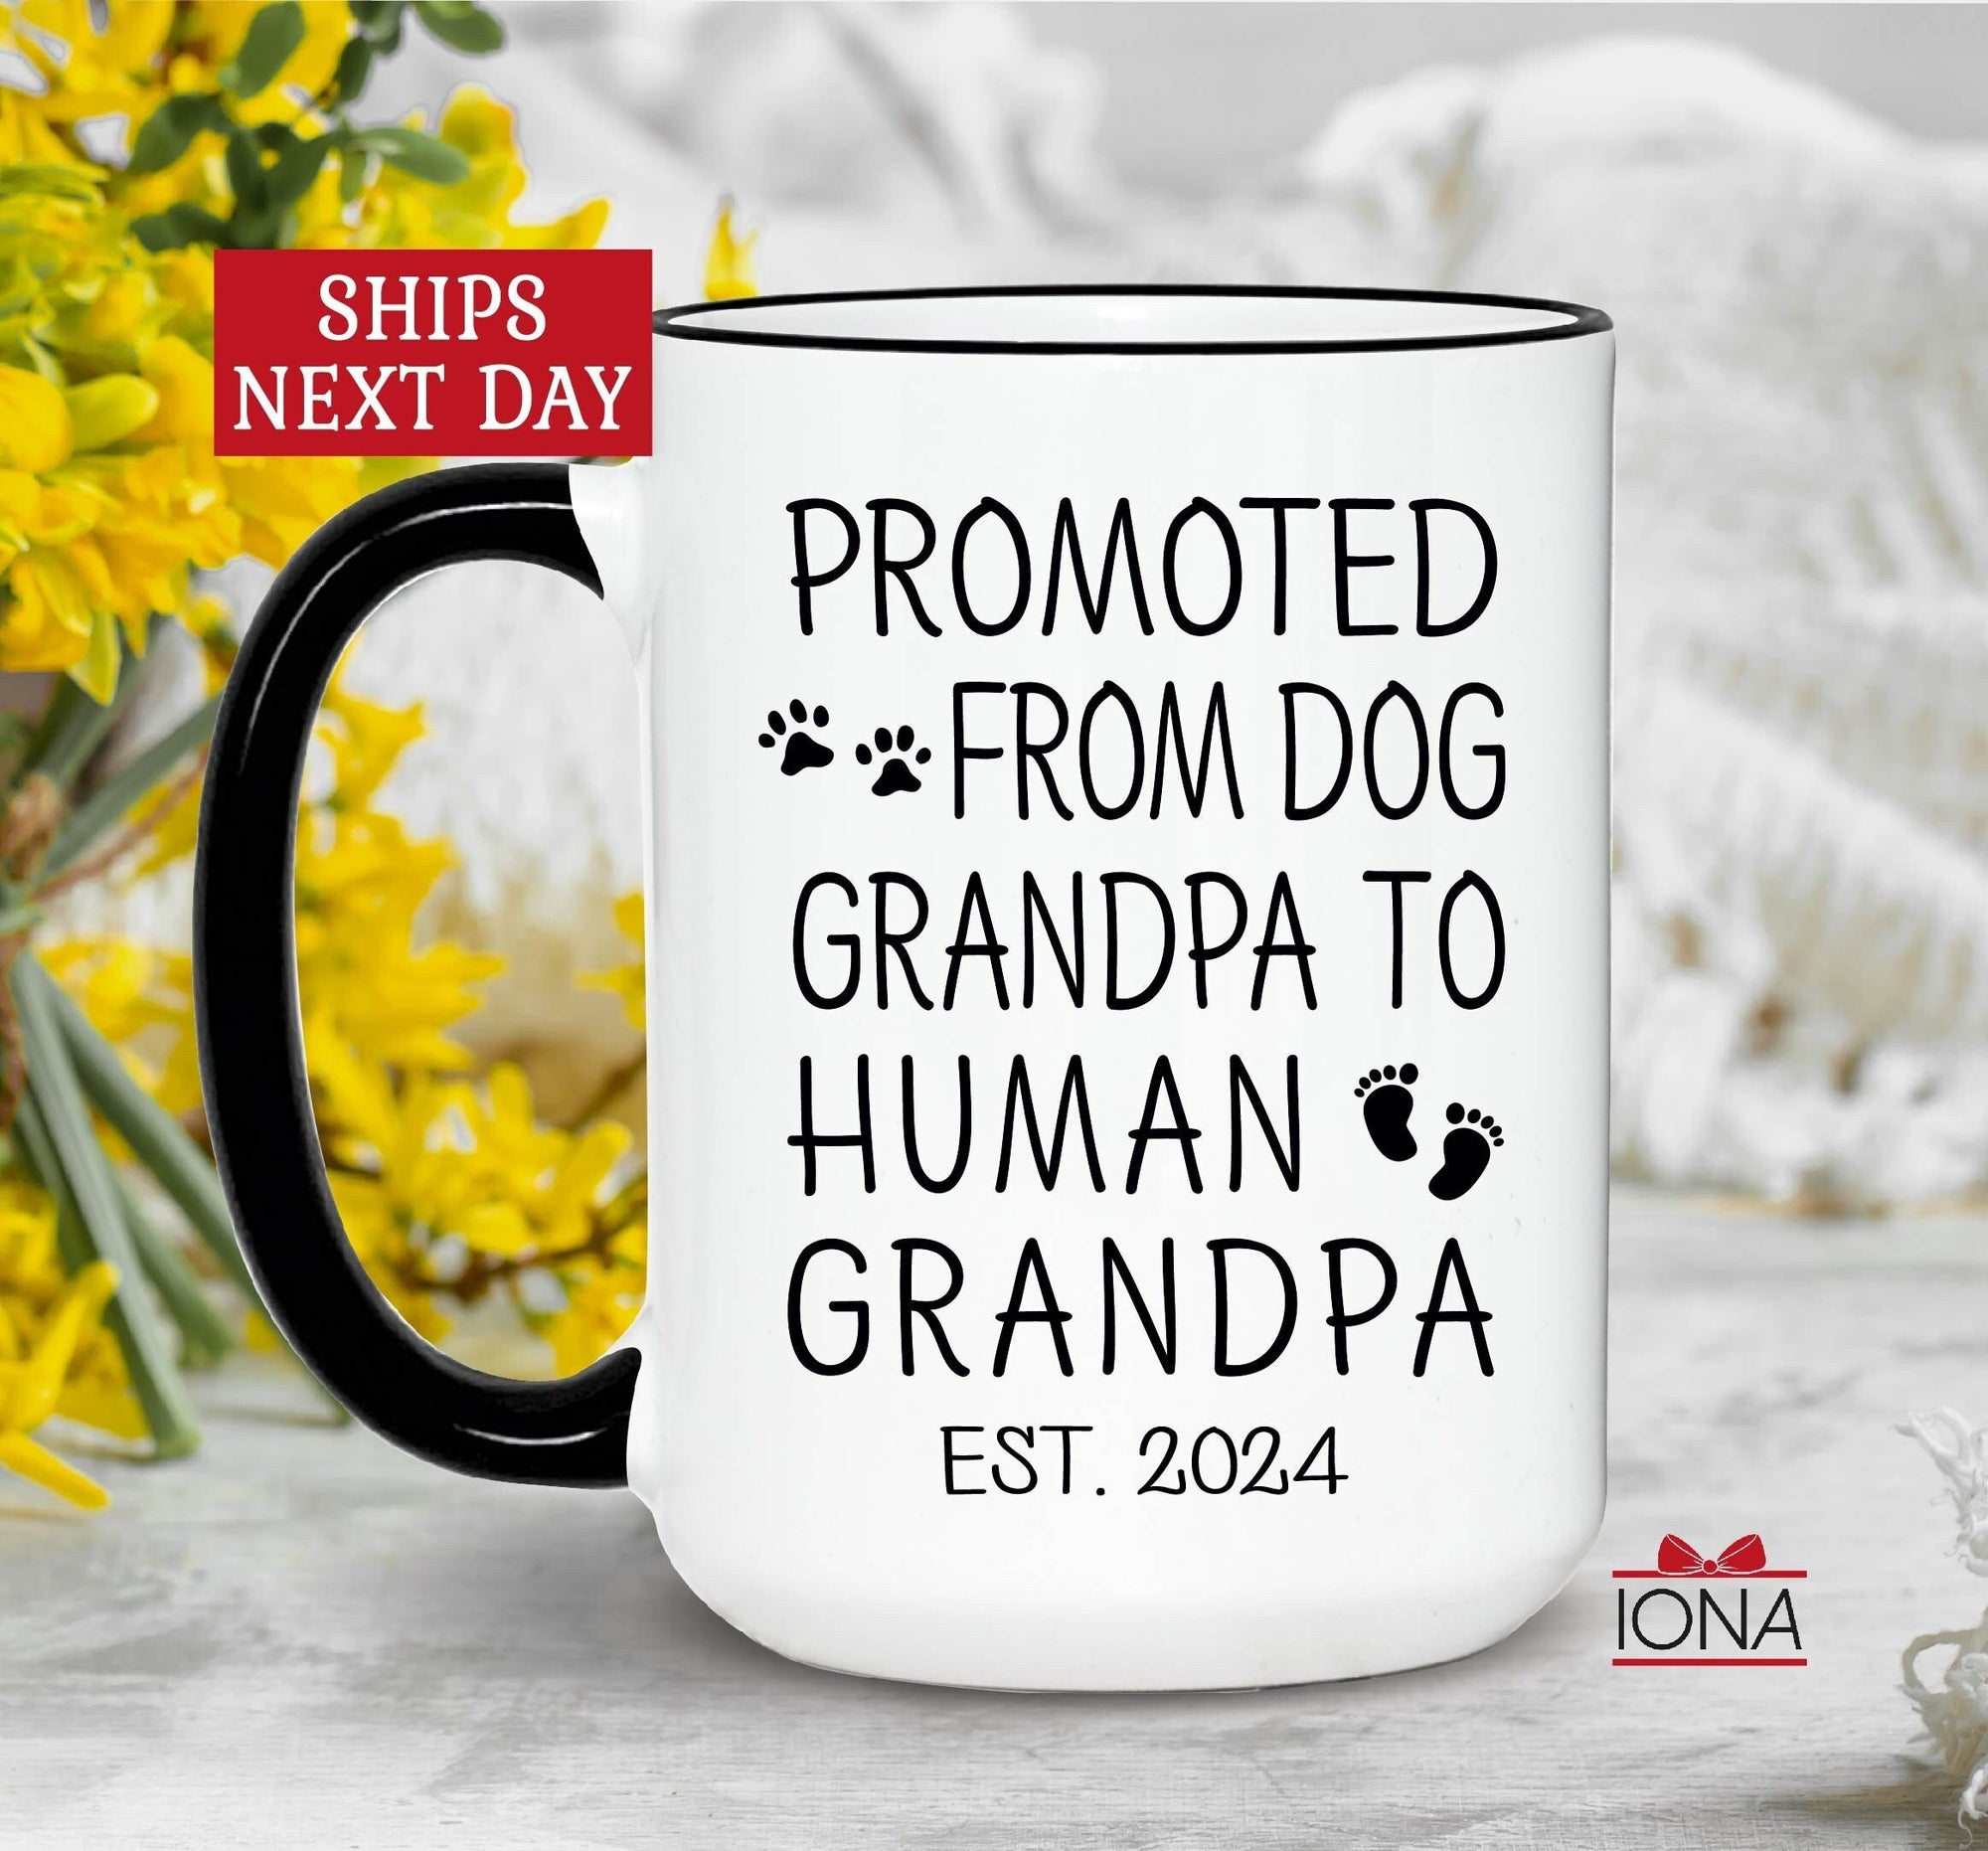 First Time Grandpa Promoted to Grandparent Mug New Baby Announcement Cat Grandpa Mug Promoted to Human Grandpa Birth Announcement Est. 2024